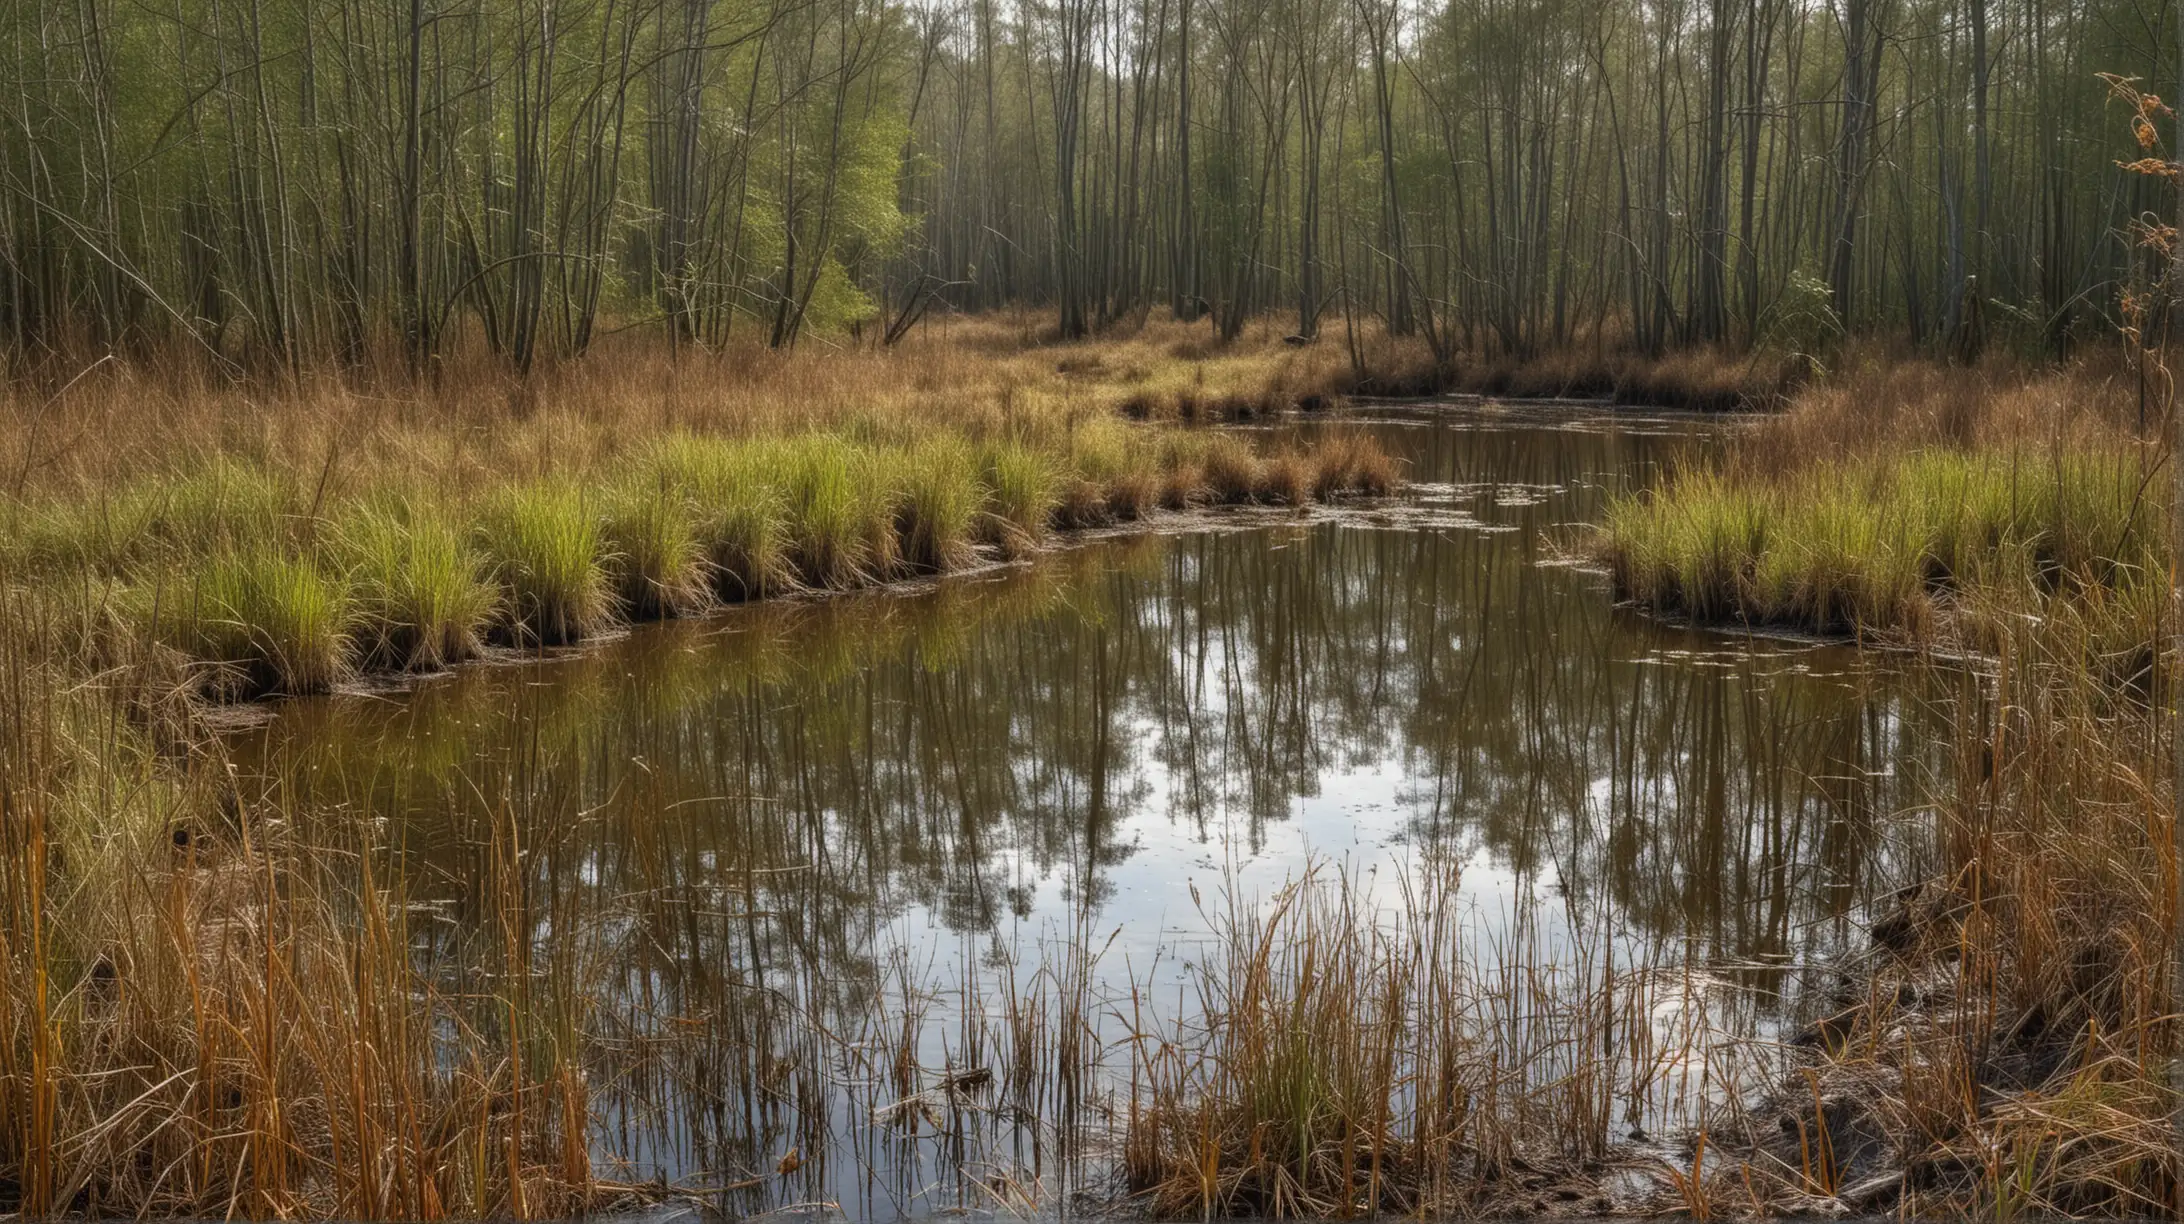 a small wild pond in an old forest, wet shore, reeds, some mud, sunny, bird's eye distant view, some forest trees are visible